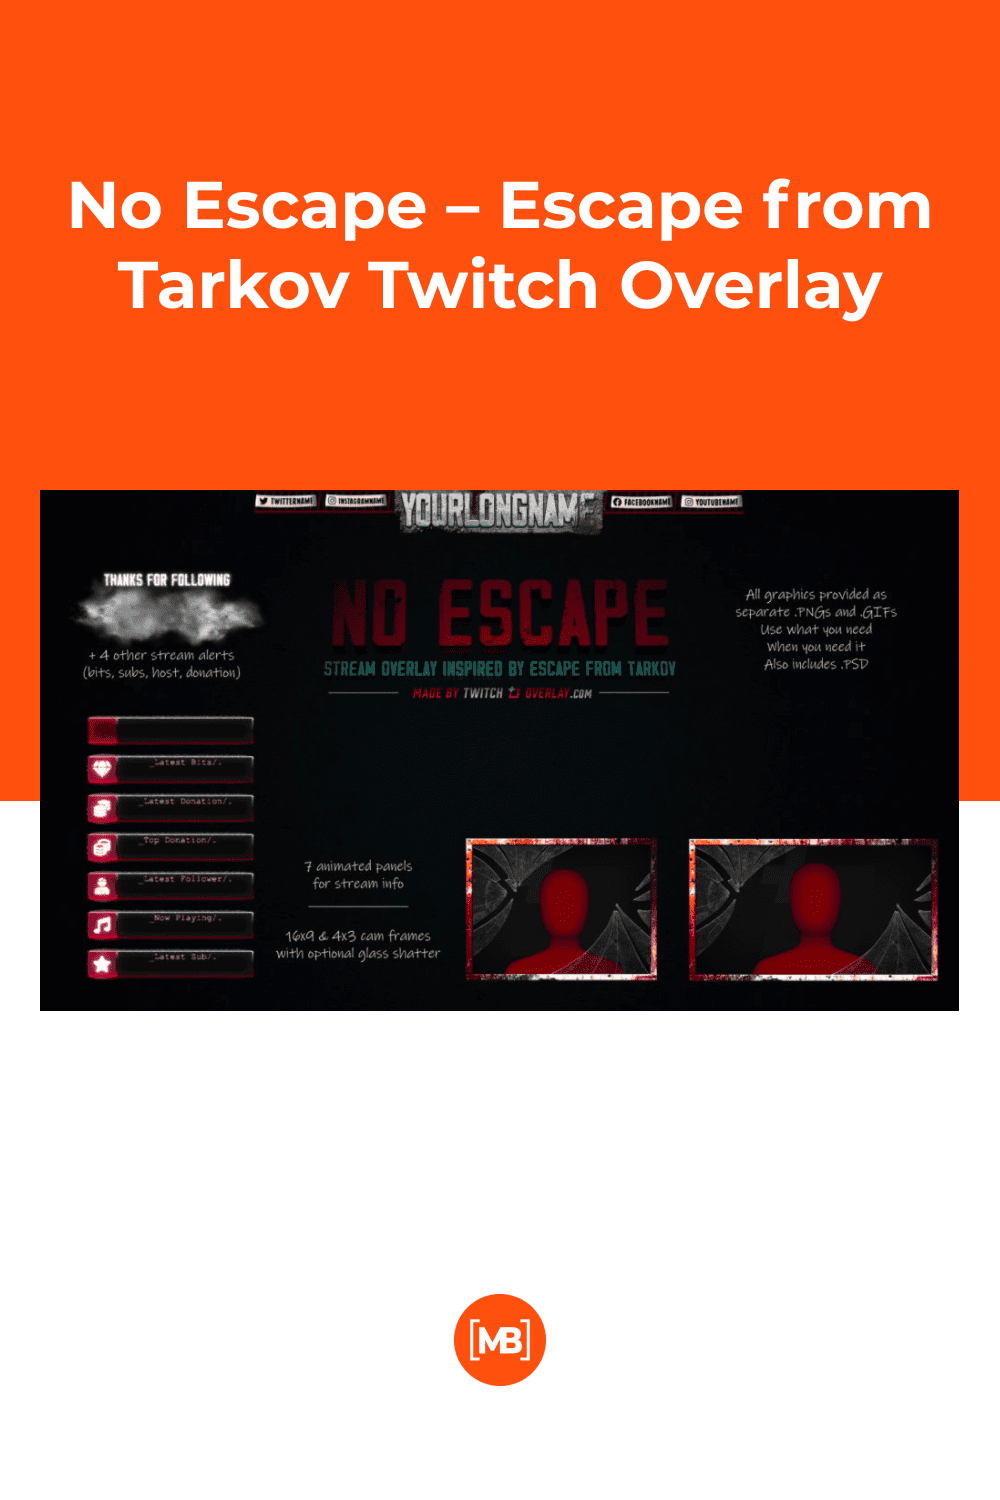 obs overlay free escape from tarkov